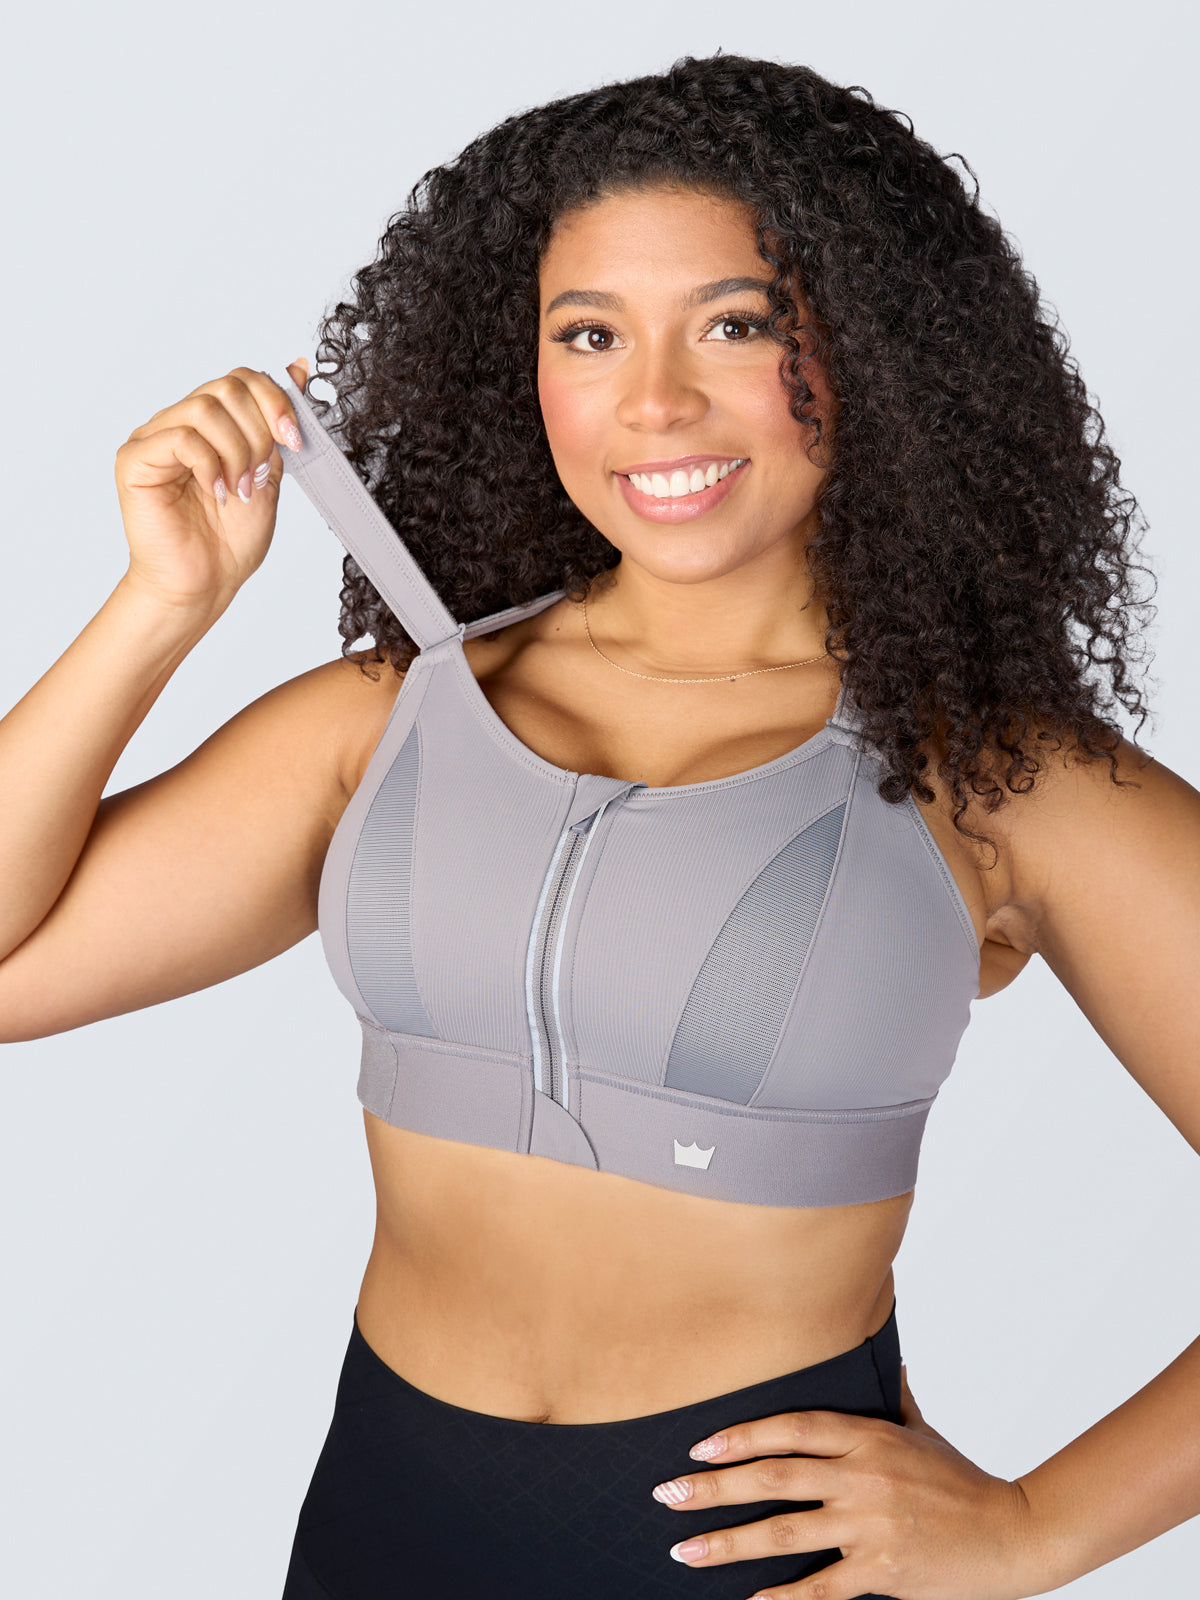 SHEFIT Women's High Impact Ultimate Sports Bra 2Luxe Size undefined - $47 -  From Dalila